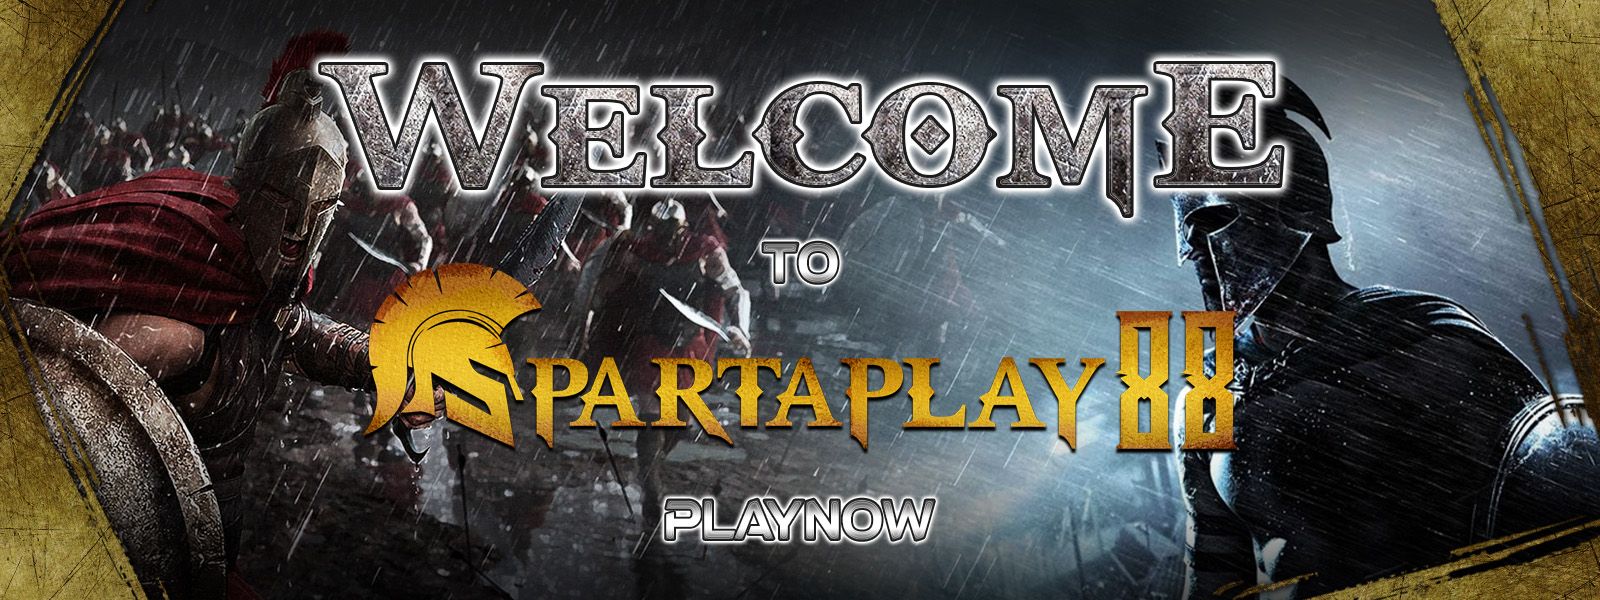 WELCOME TO SPARTAPLAY88